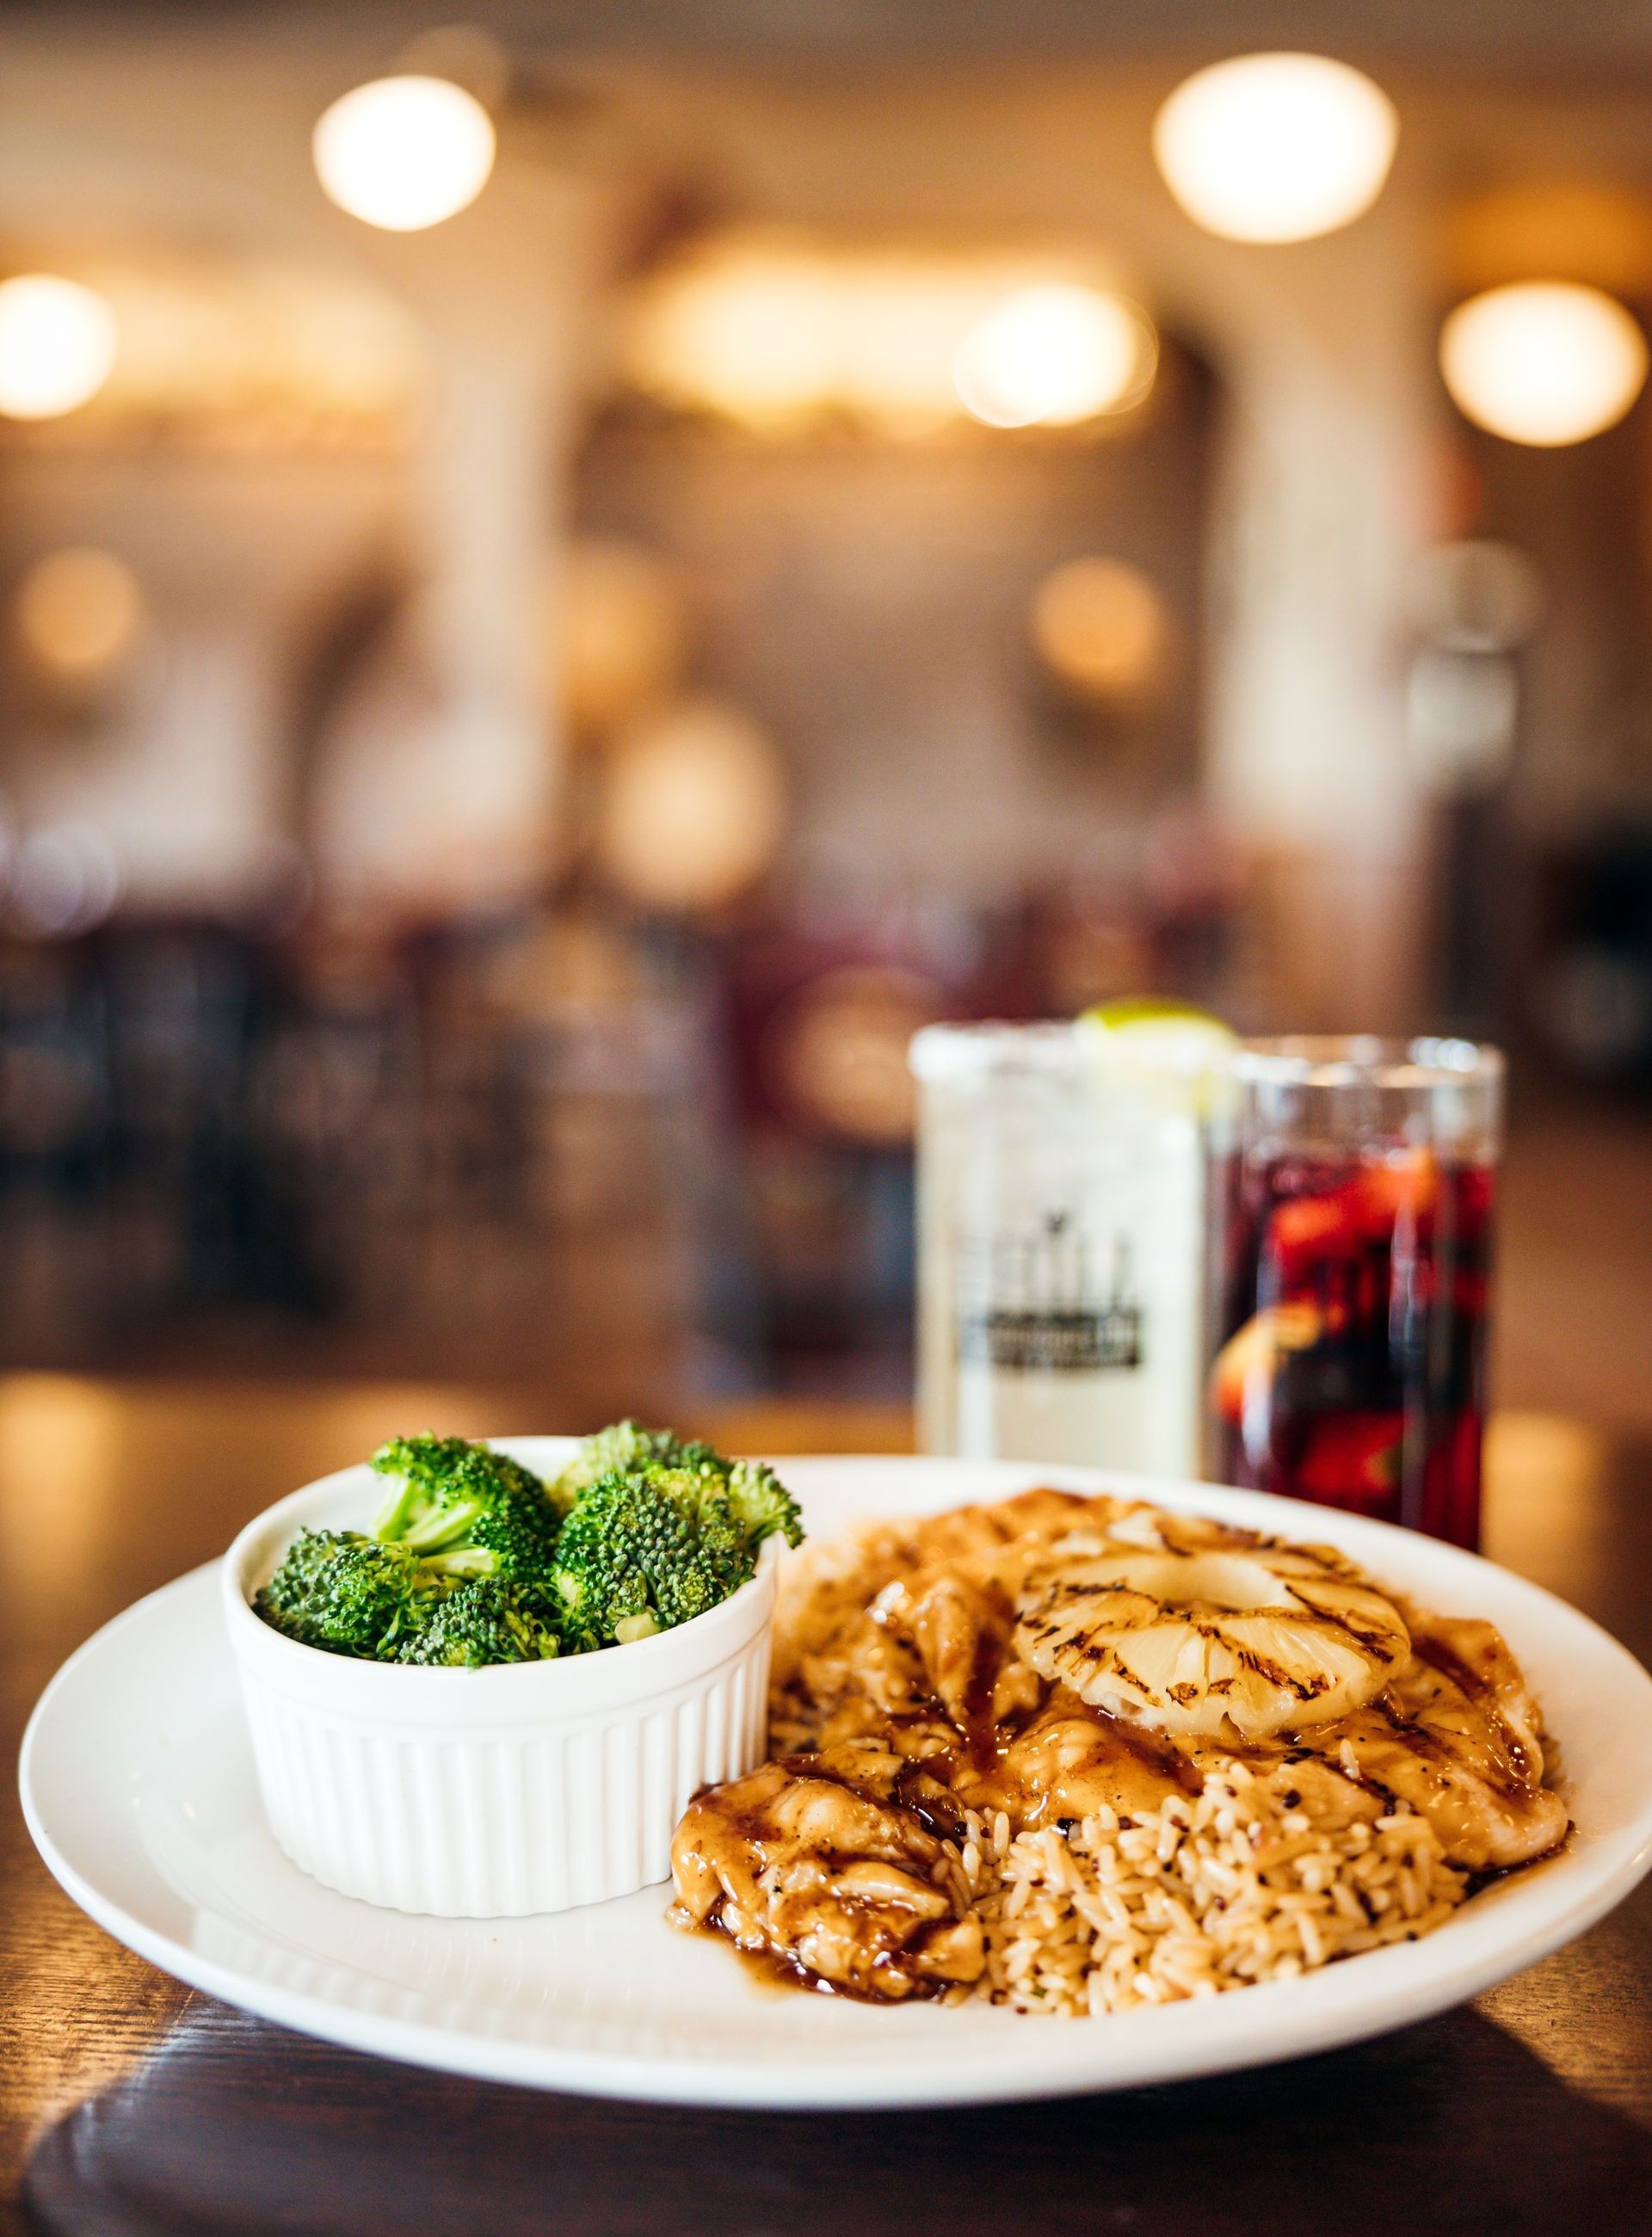 Try Our Signature Entrees Like Hawaiian Teriyaki Chicken at the Hill in Holts Summit, Missouri.